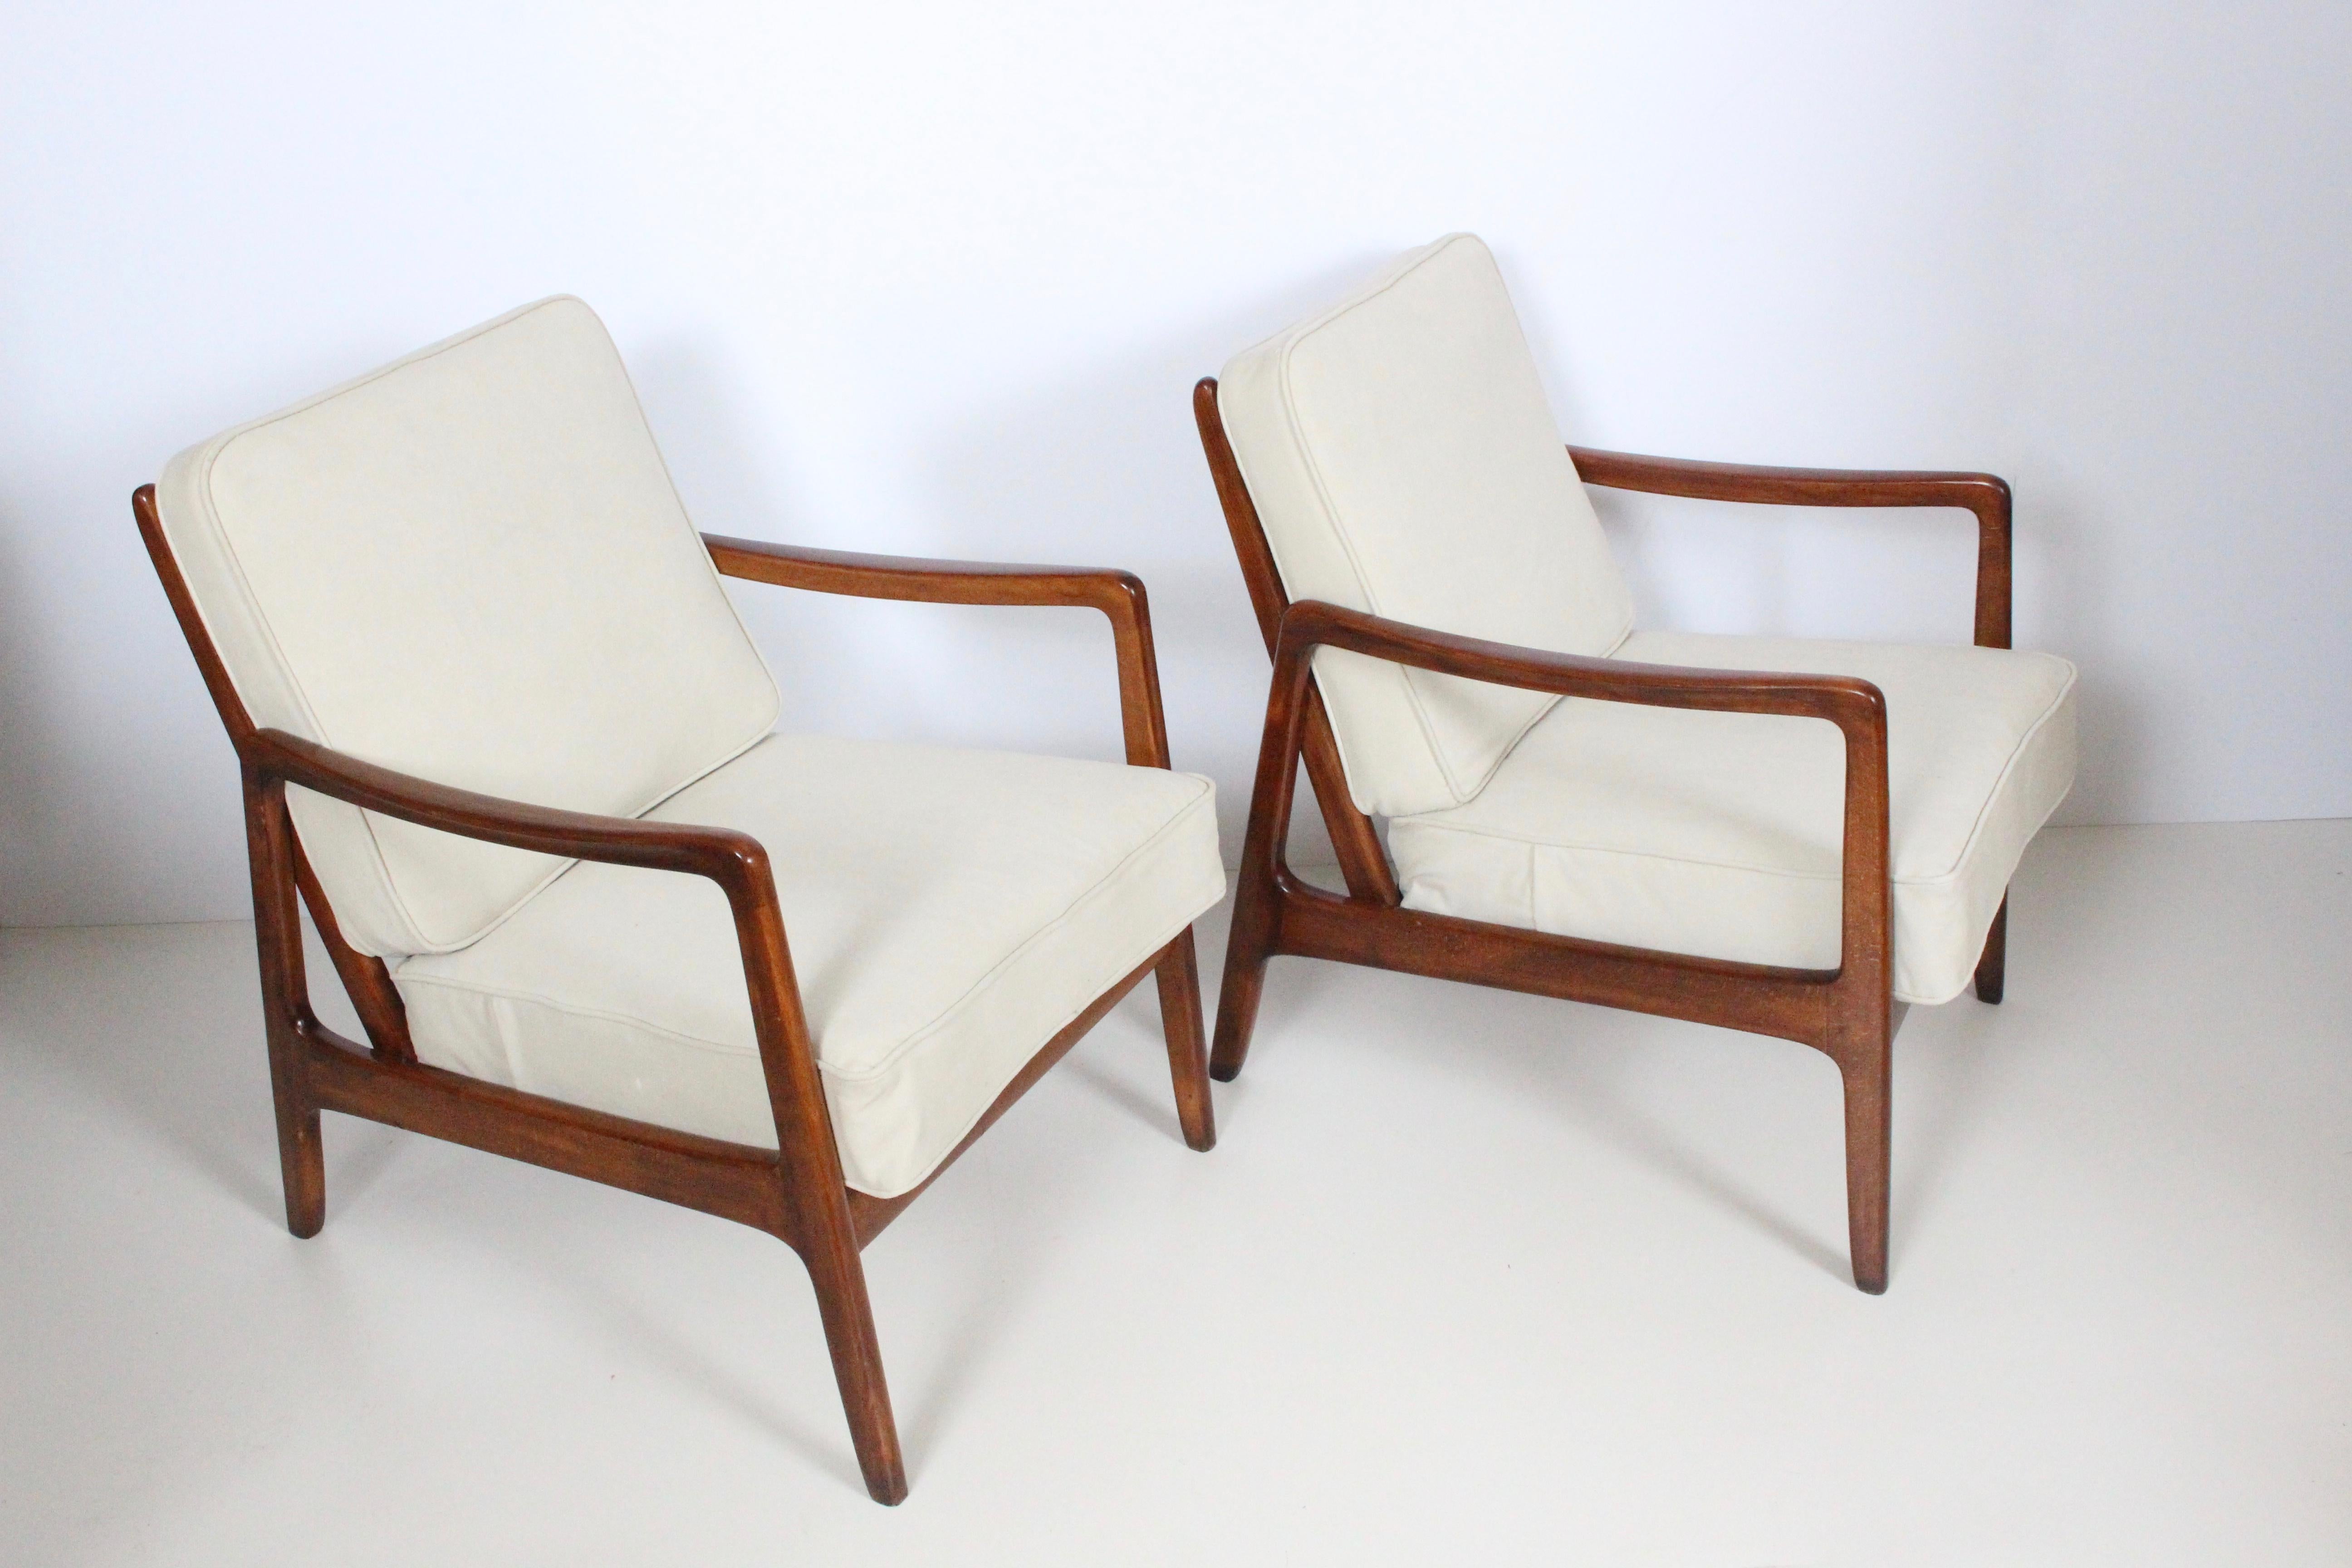 Danish modern pair of solid Cuban mahogany lounge armchairs by Ole Wanscher designed for France and Daverkosen distributed by John Stuart. Featuring solid and sturdy mahogany angled ladder back style framework for ultimate comfort, with newly